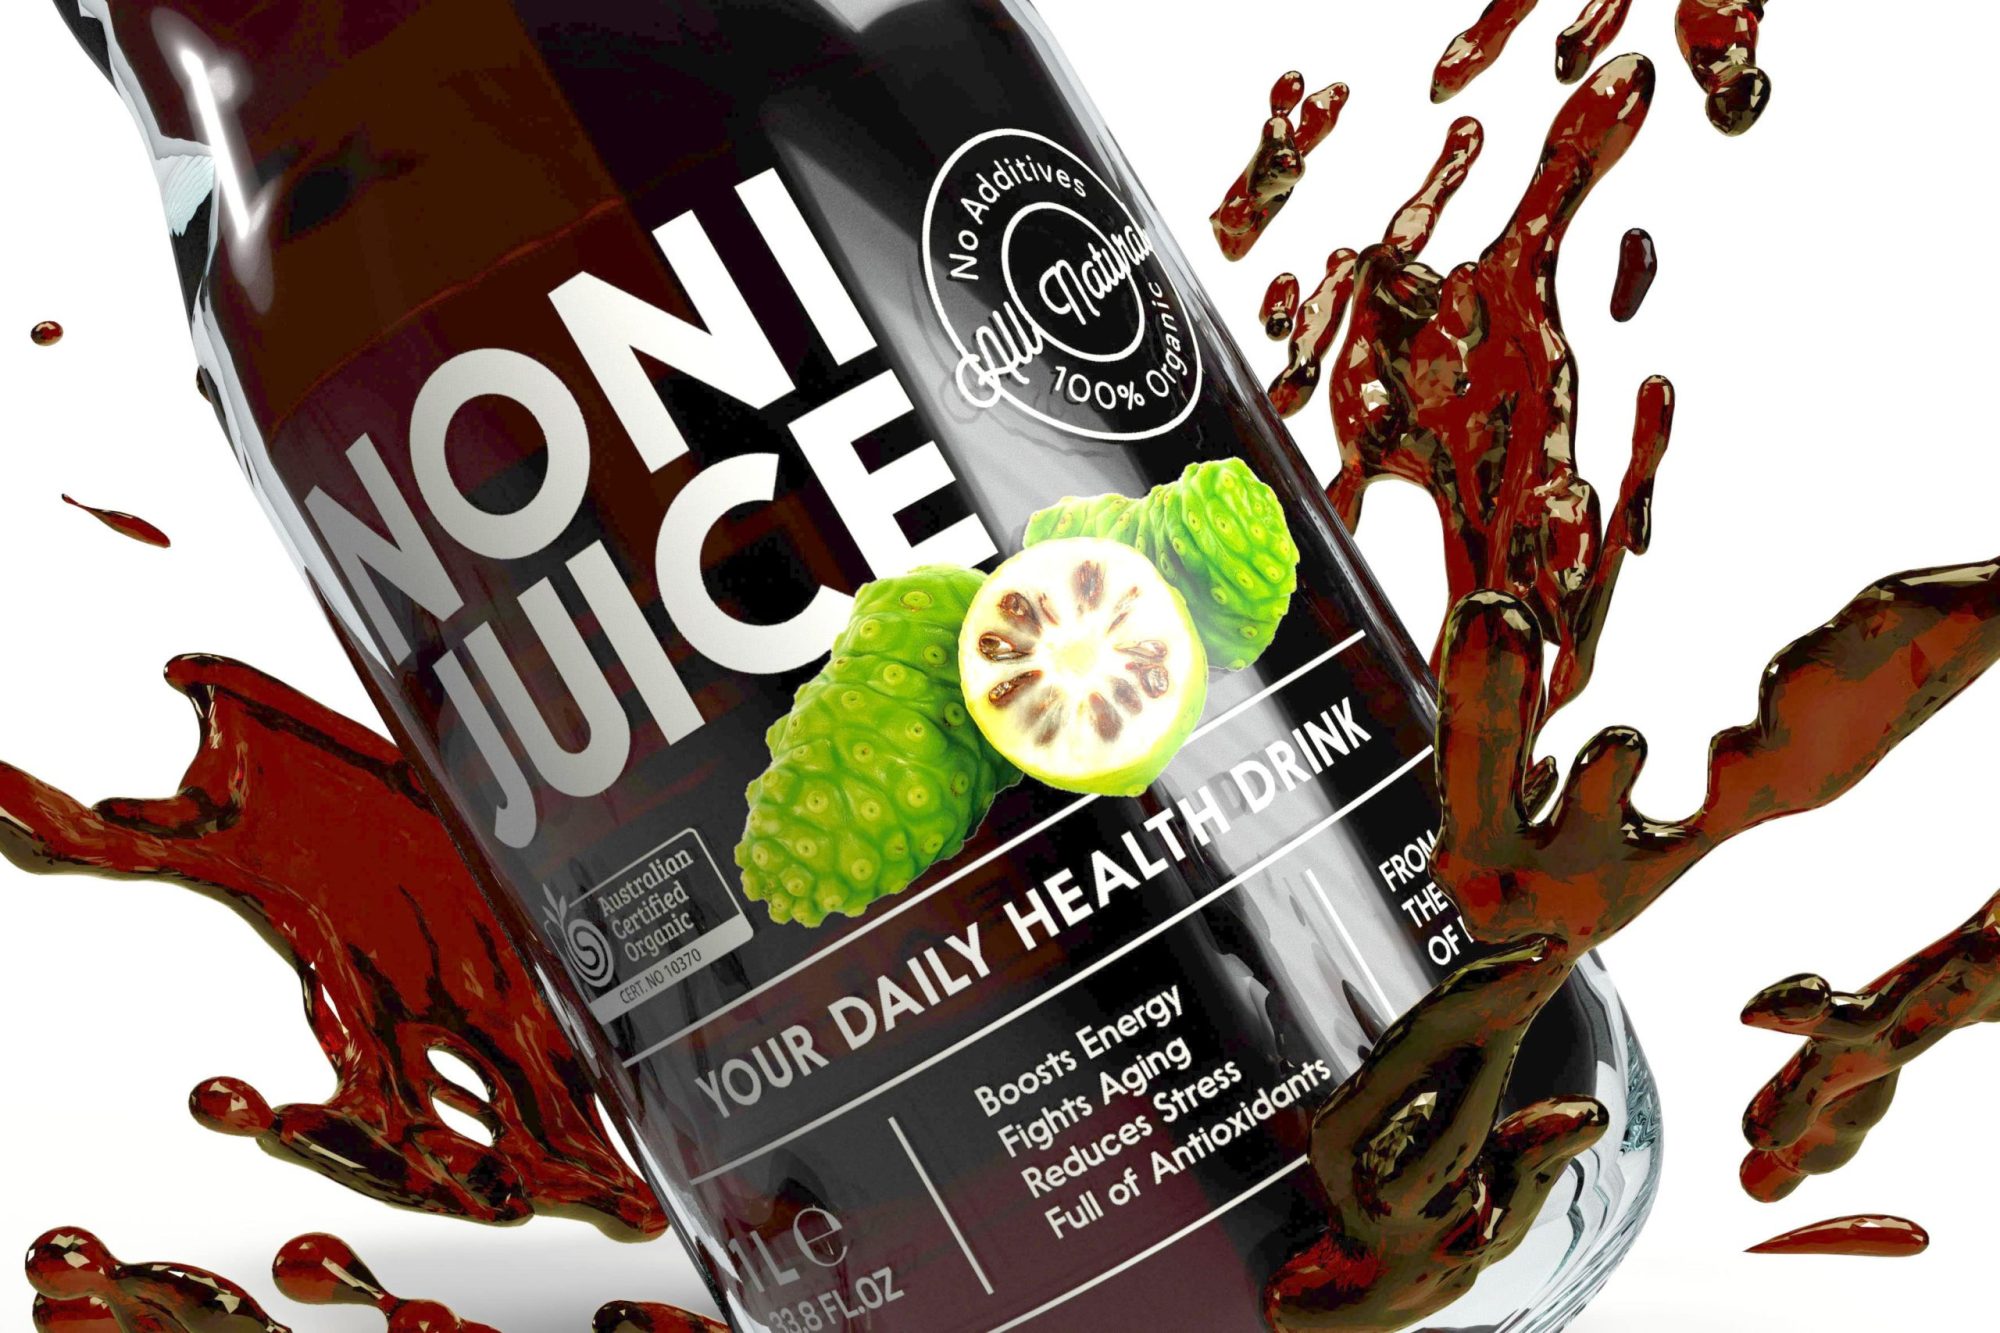 re-fruit-packaging-design-product-label-design-branding-logo-visual-identity-food-fmcg-product-line-ready-meal-snack-packaging-design-juice-vegan-graphic-design-noni-island-origins-healthy